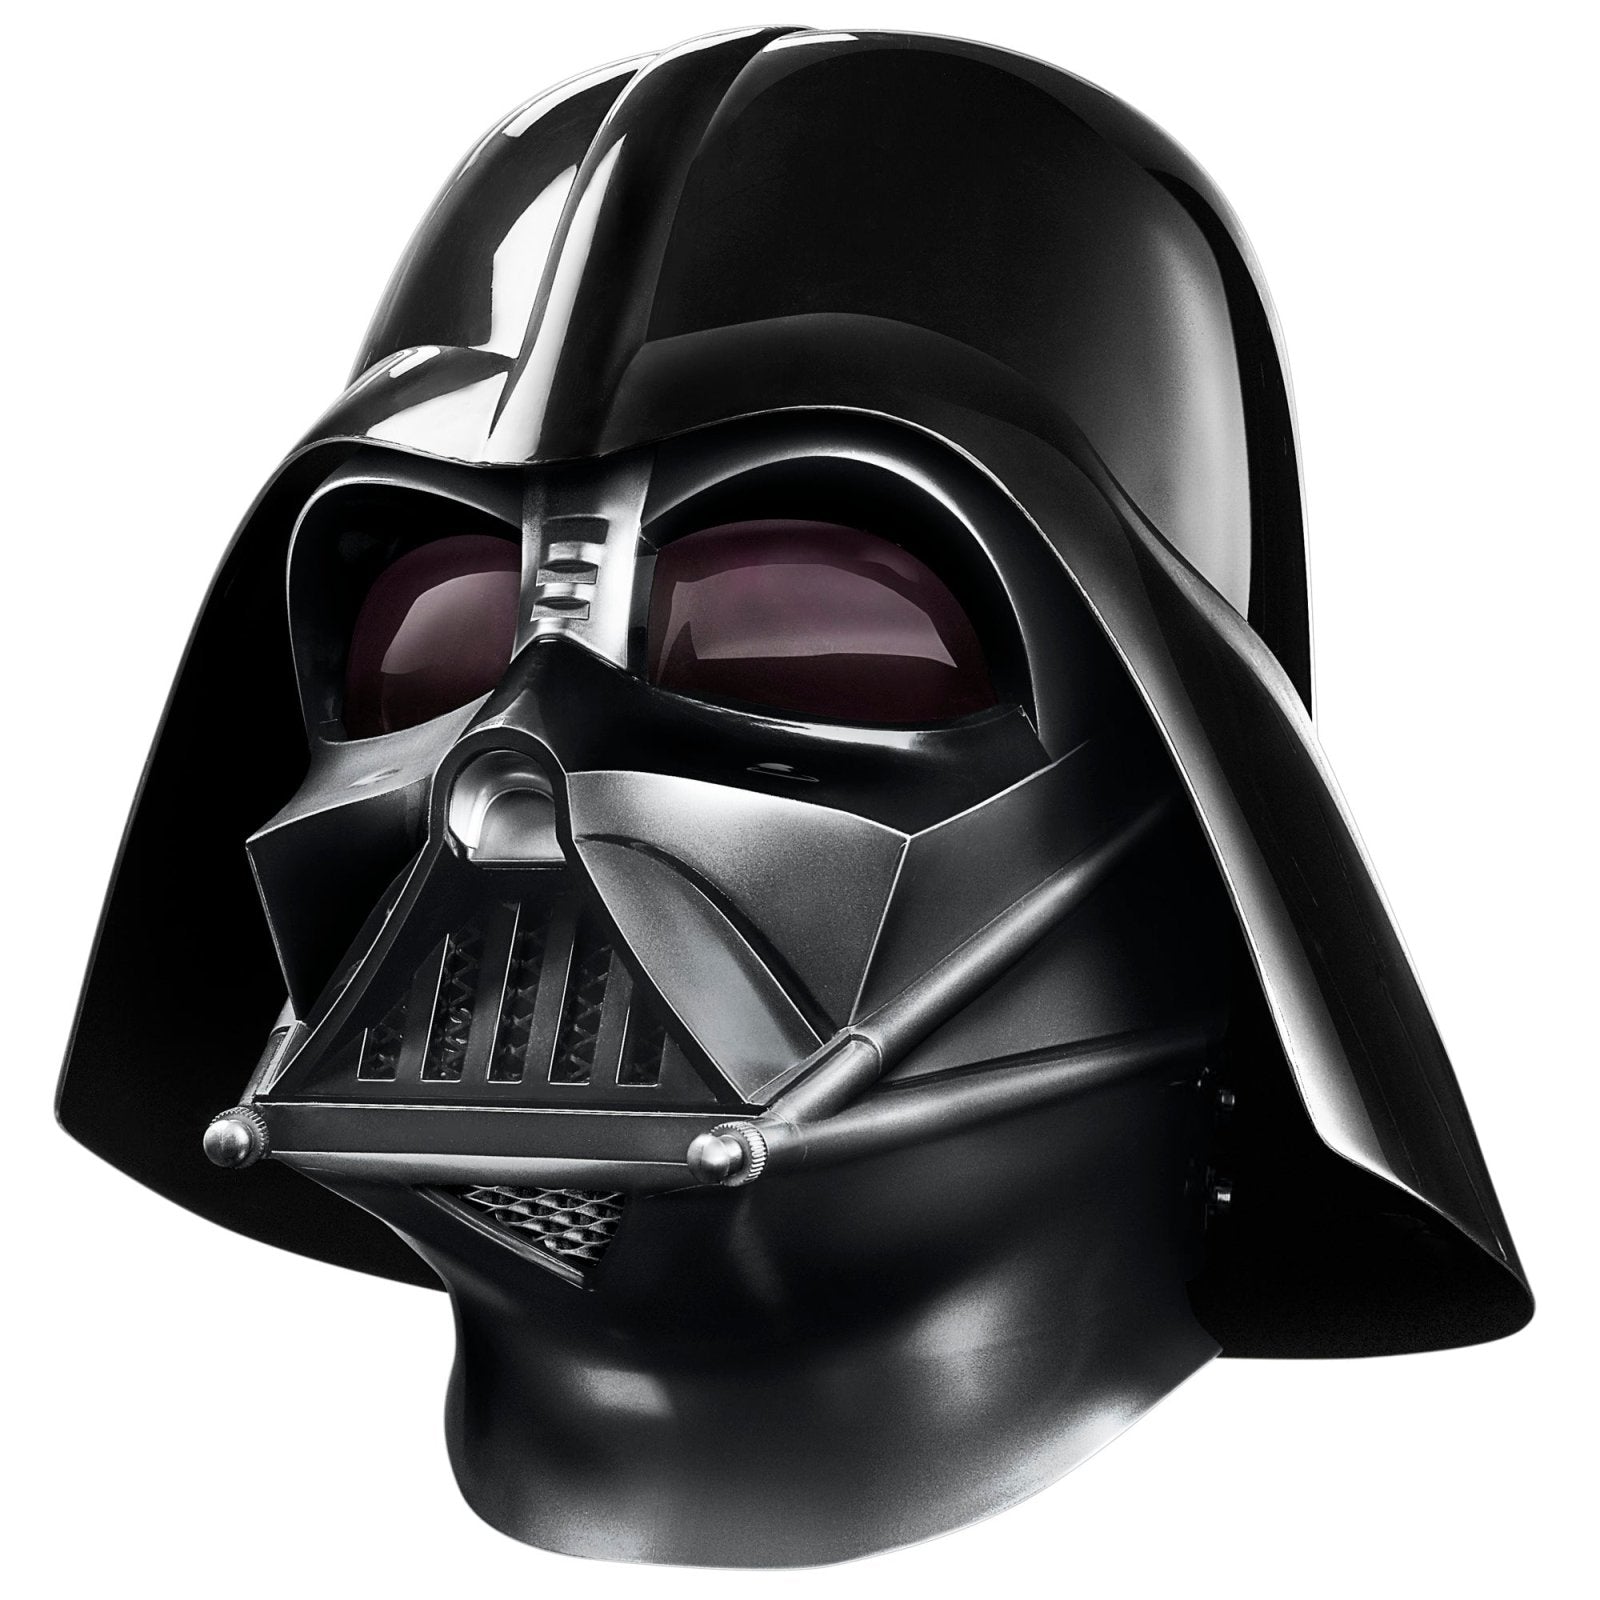 Star Wars The Black Series Darth Vader premium electronic helmet - The Fourth Place